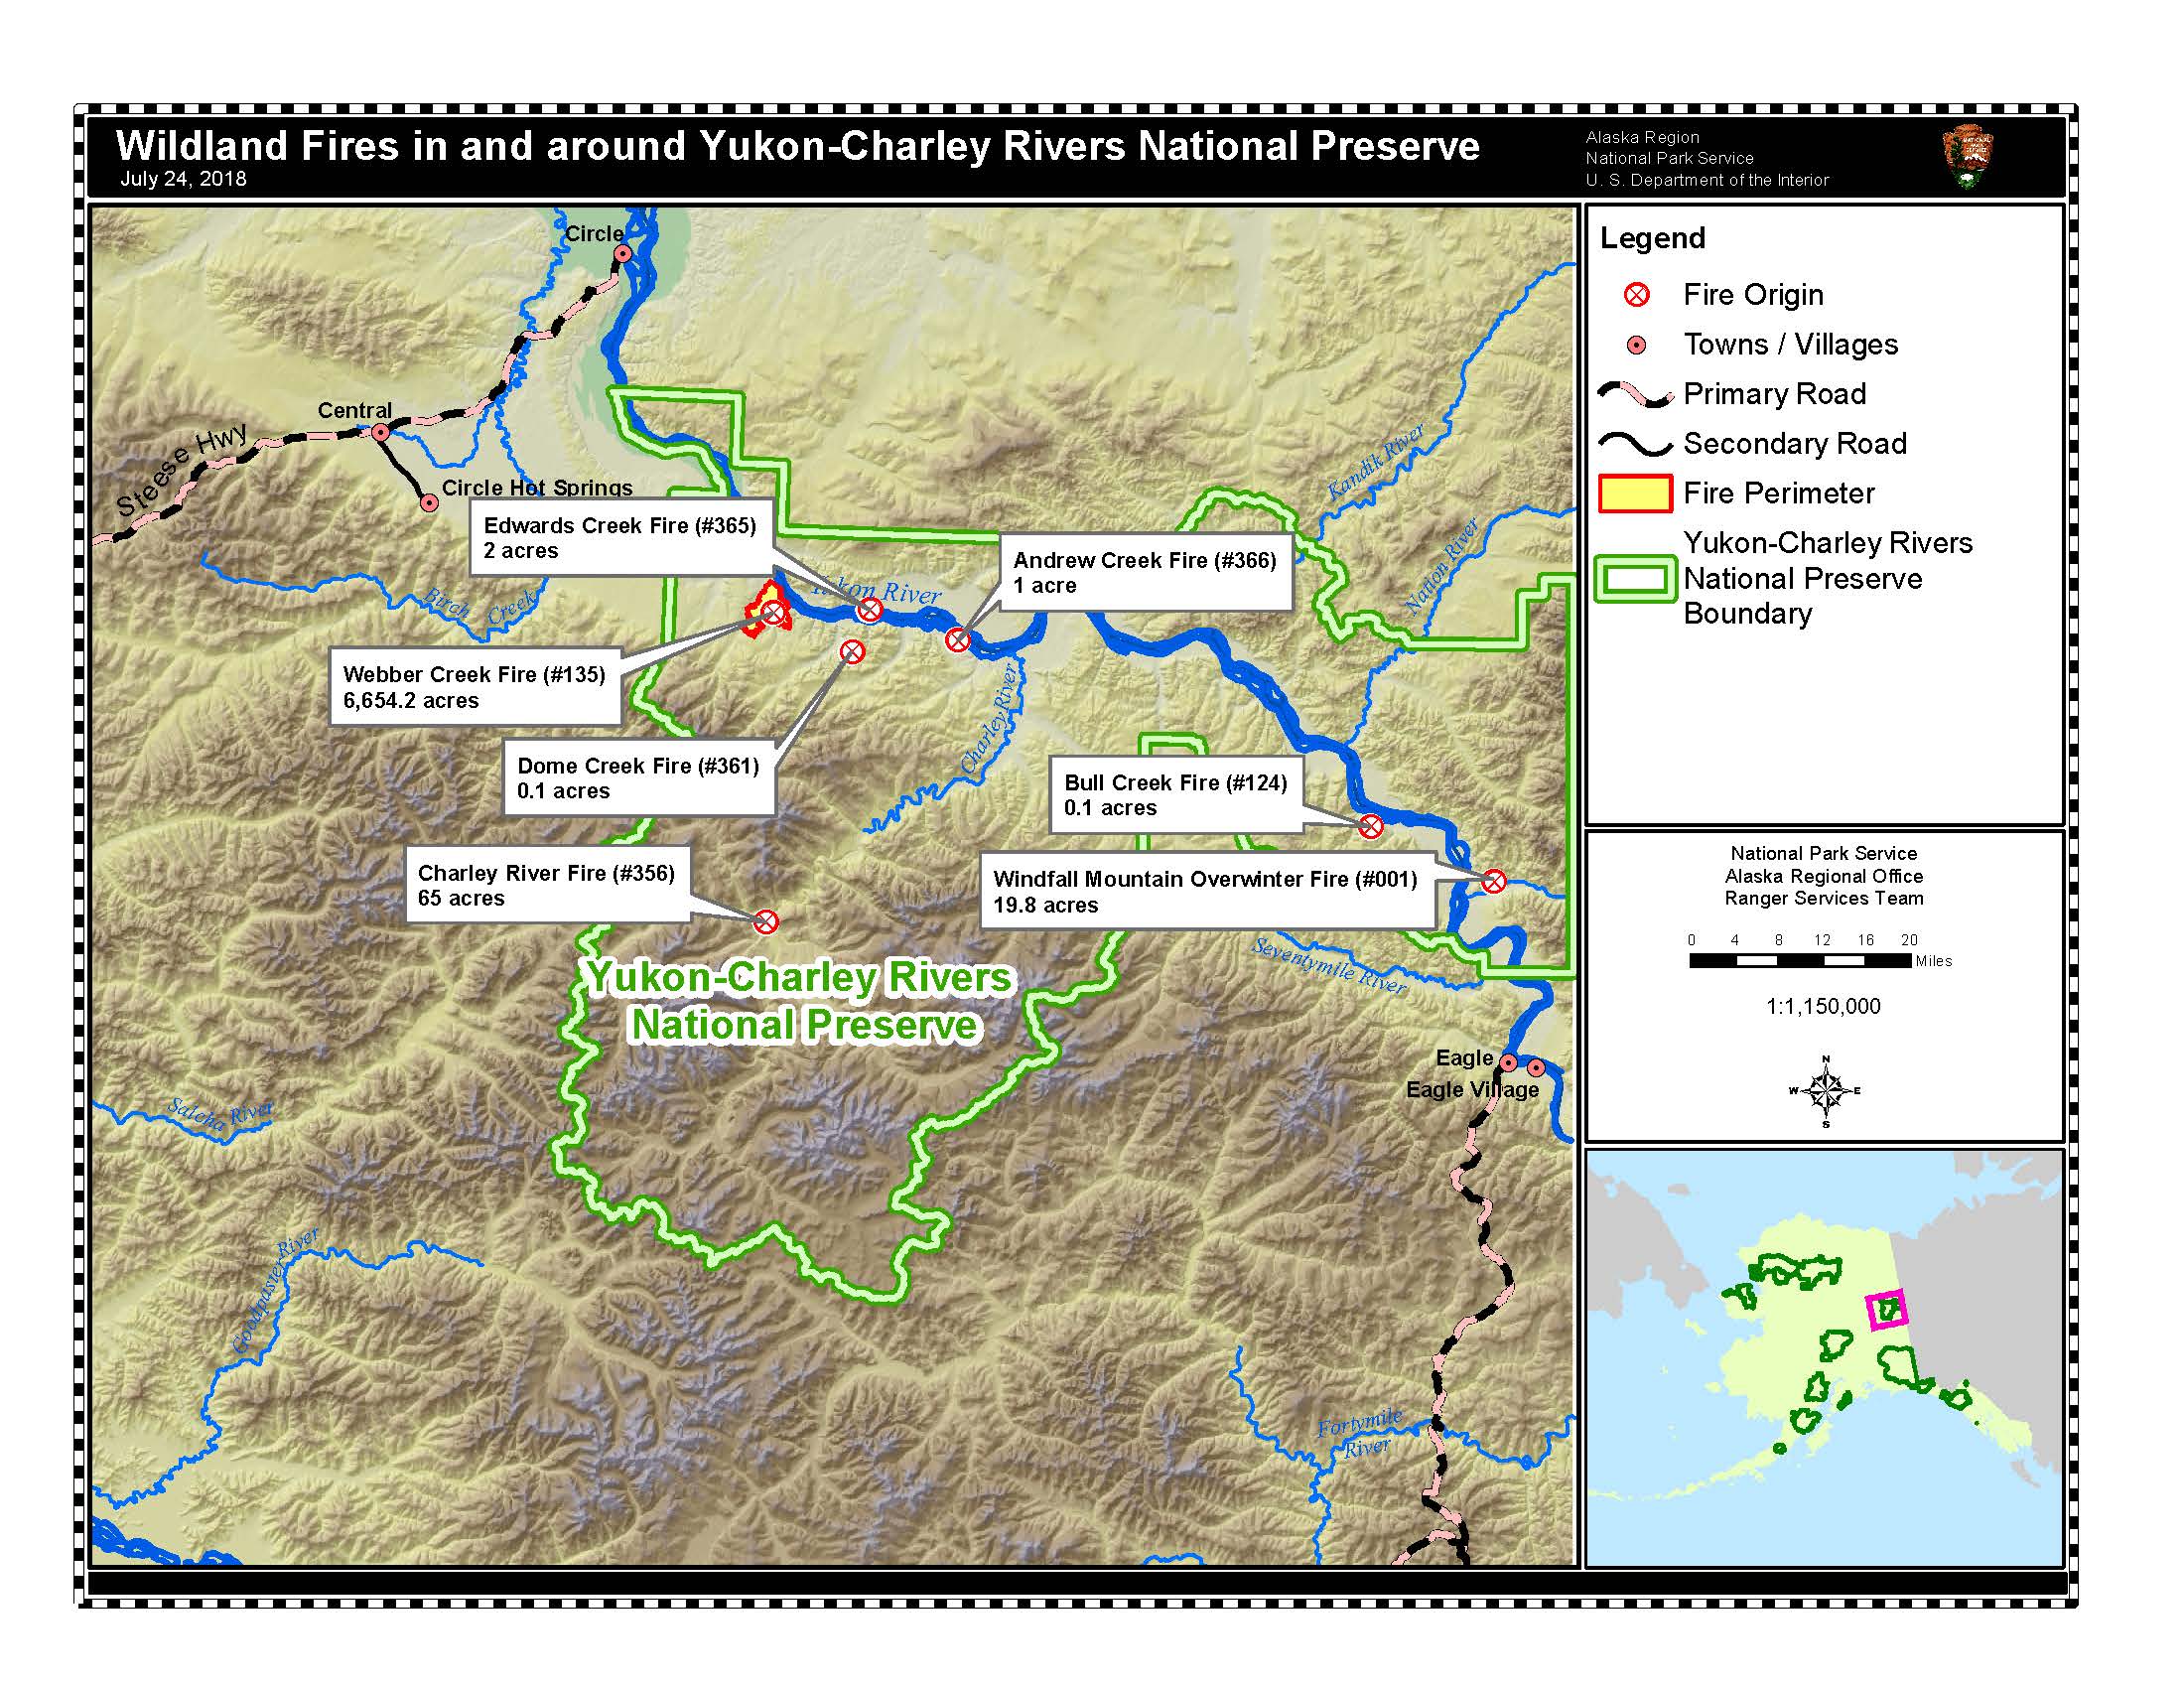 National Park Service map of current fire activity in Yukon-Charley Rivers National Preserve